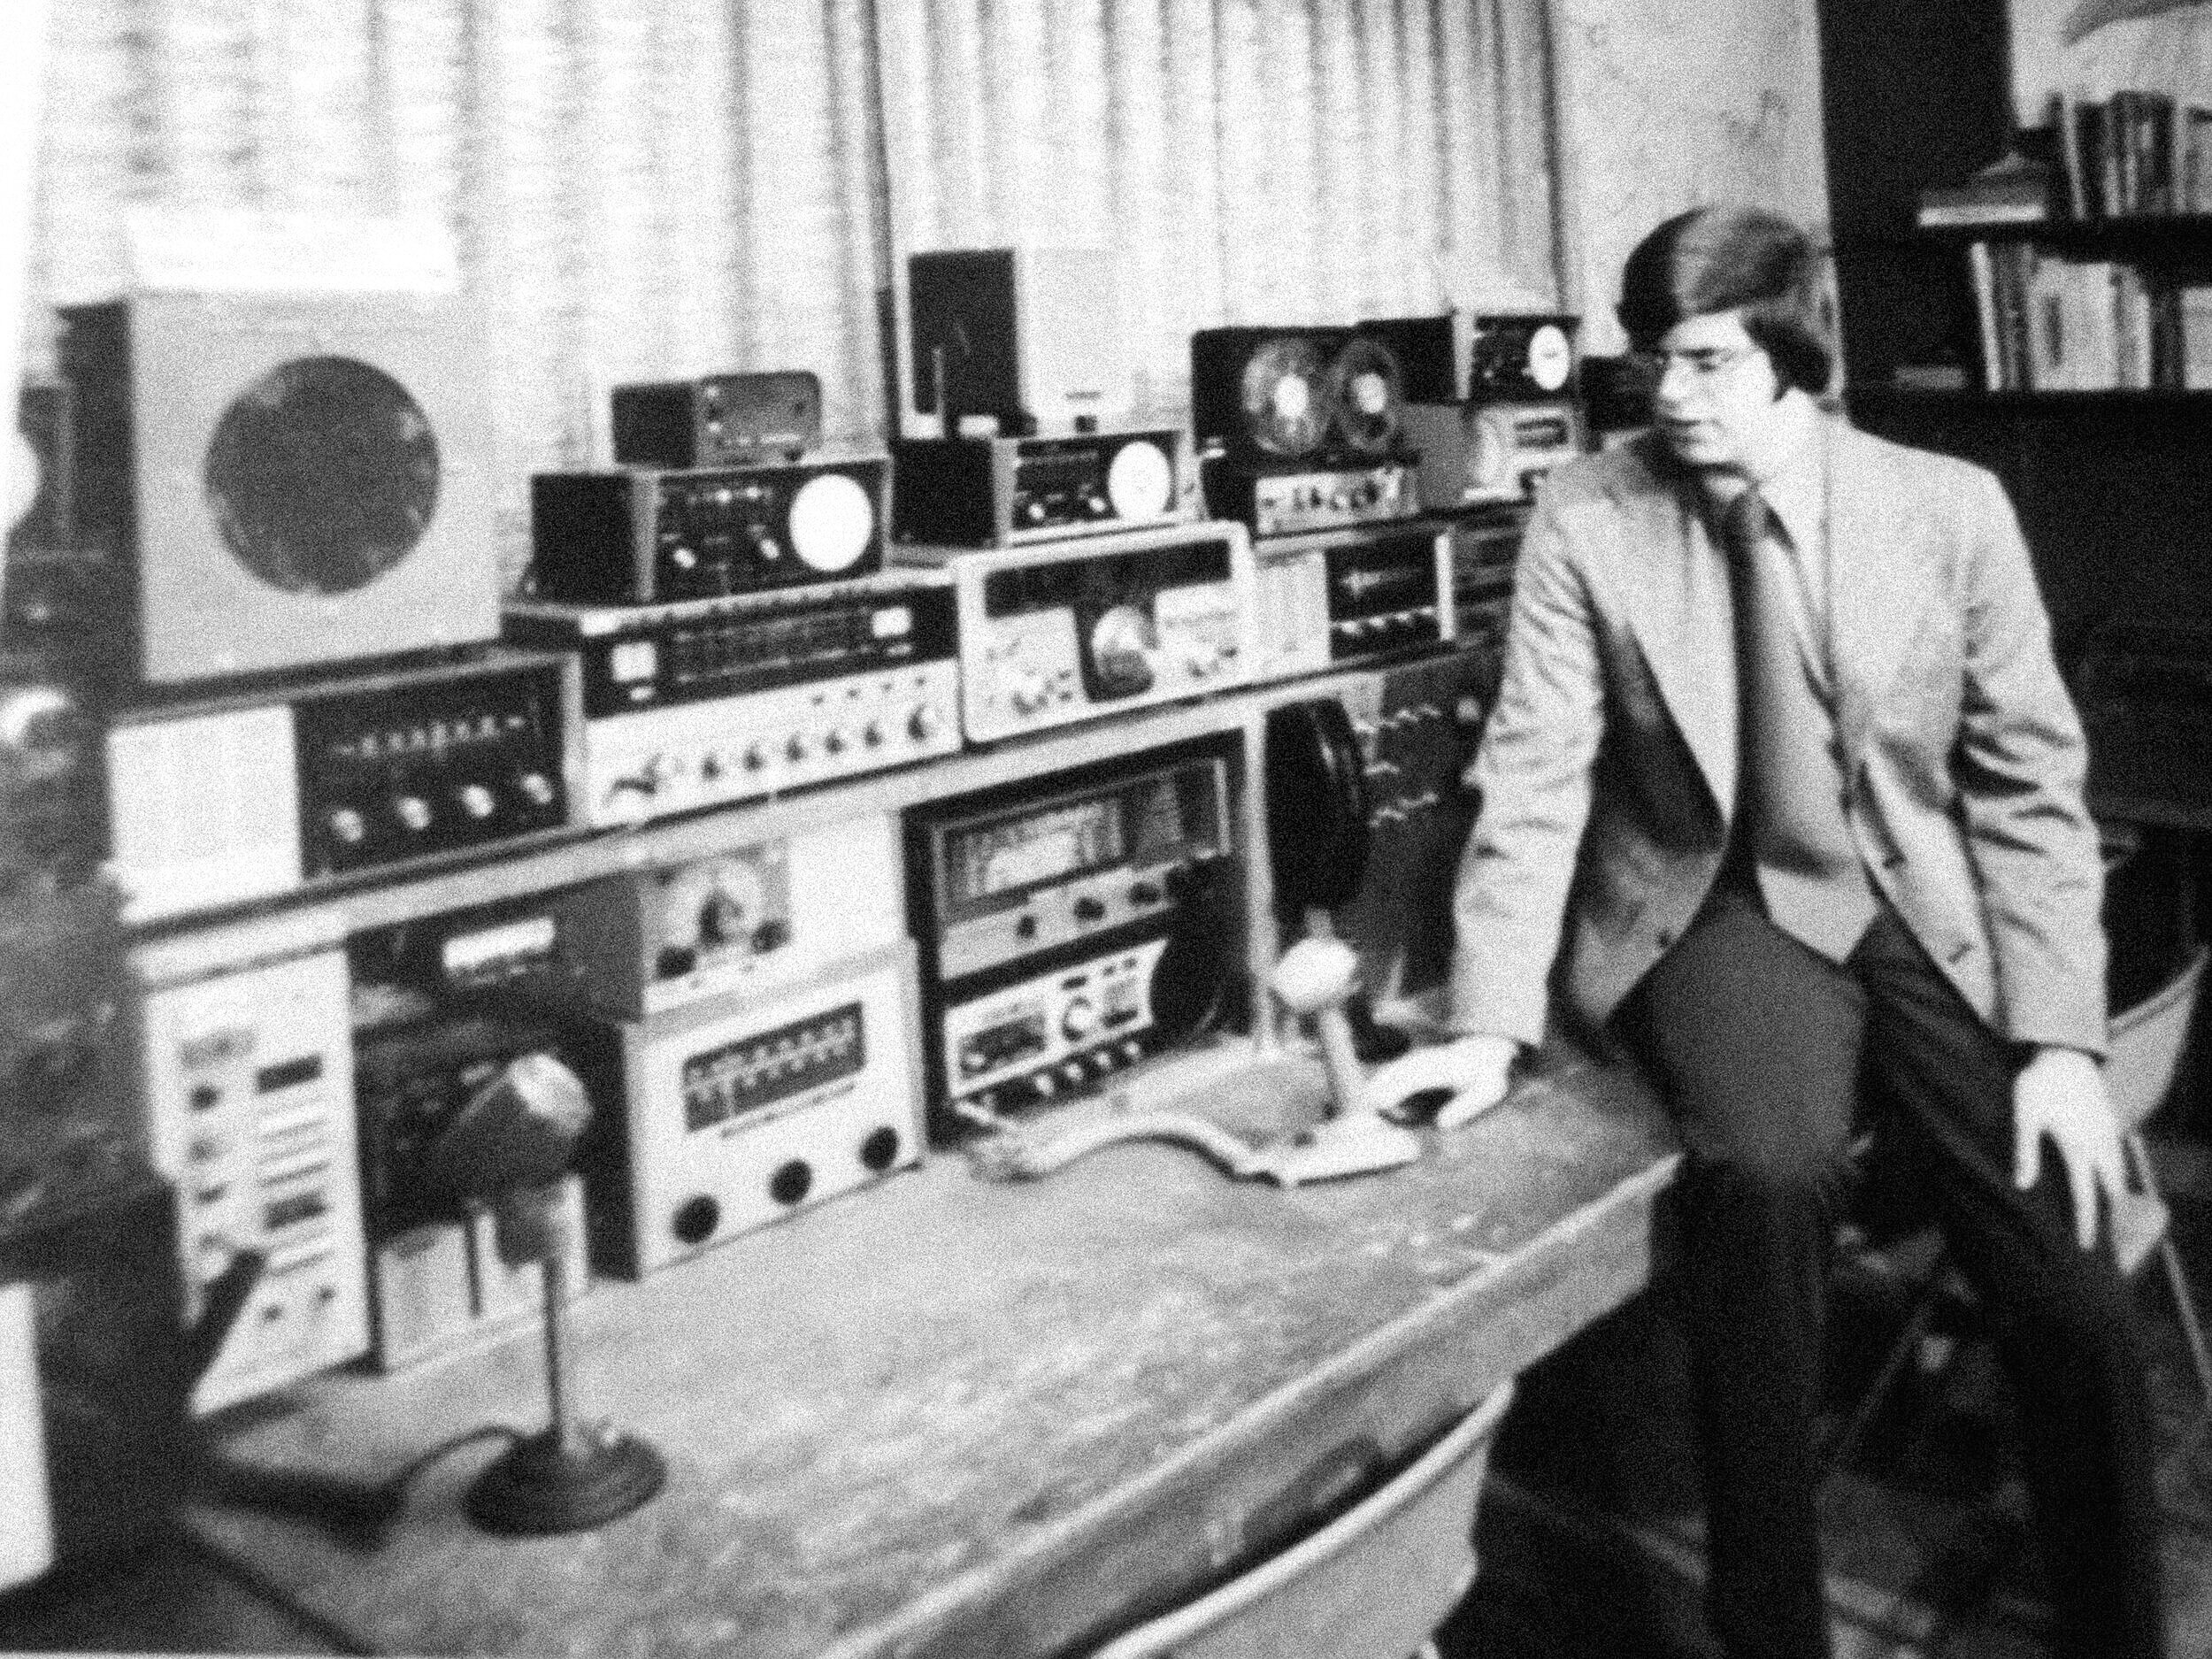  Photo of Stan Gordon from the early 1970s in his UFO Research Operations Center. (©Stan Gordon, from the Stan Gordon photo files)  